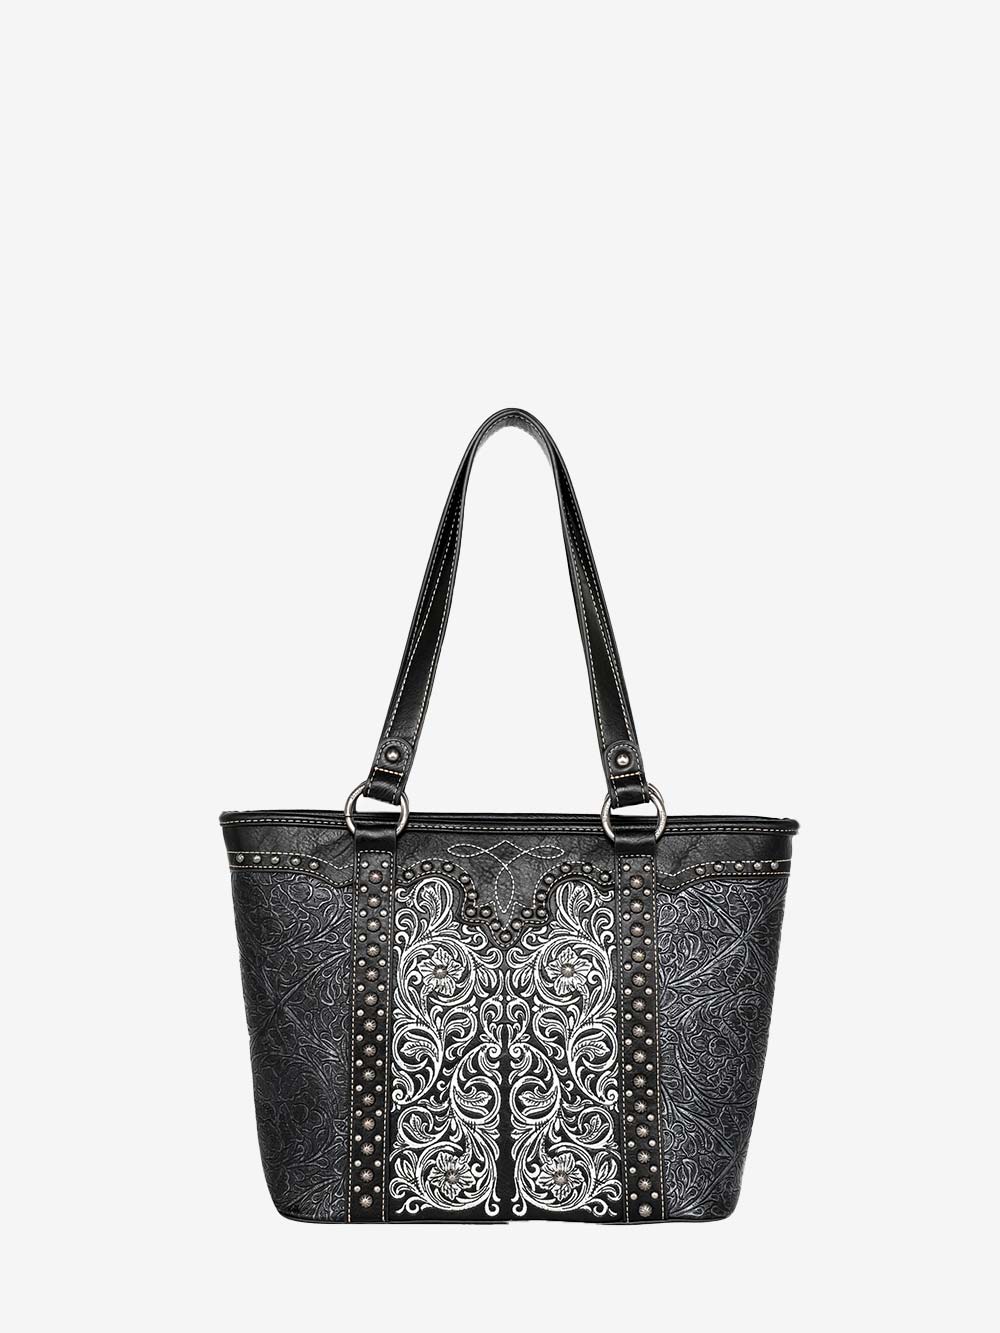 Montana West Floral Embroidered Embossed Studded Tote Bag - Montana West World